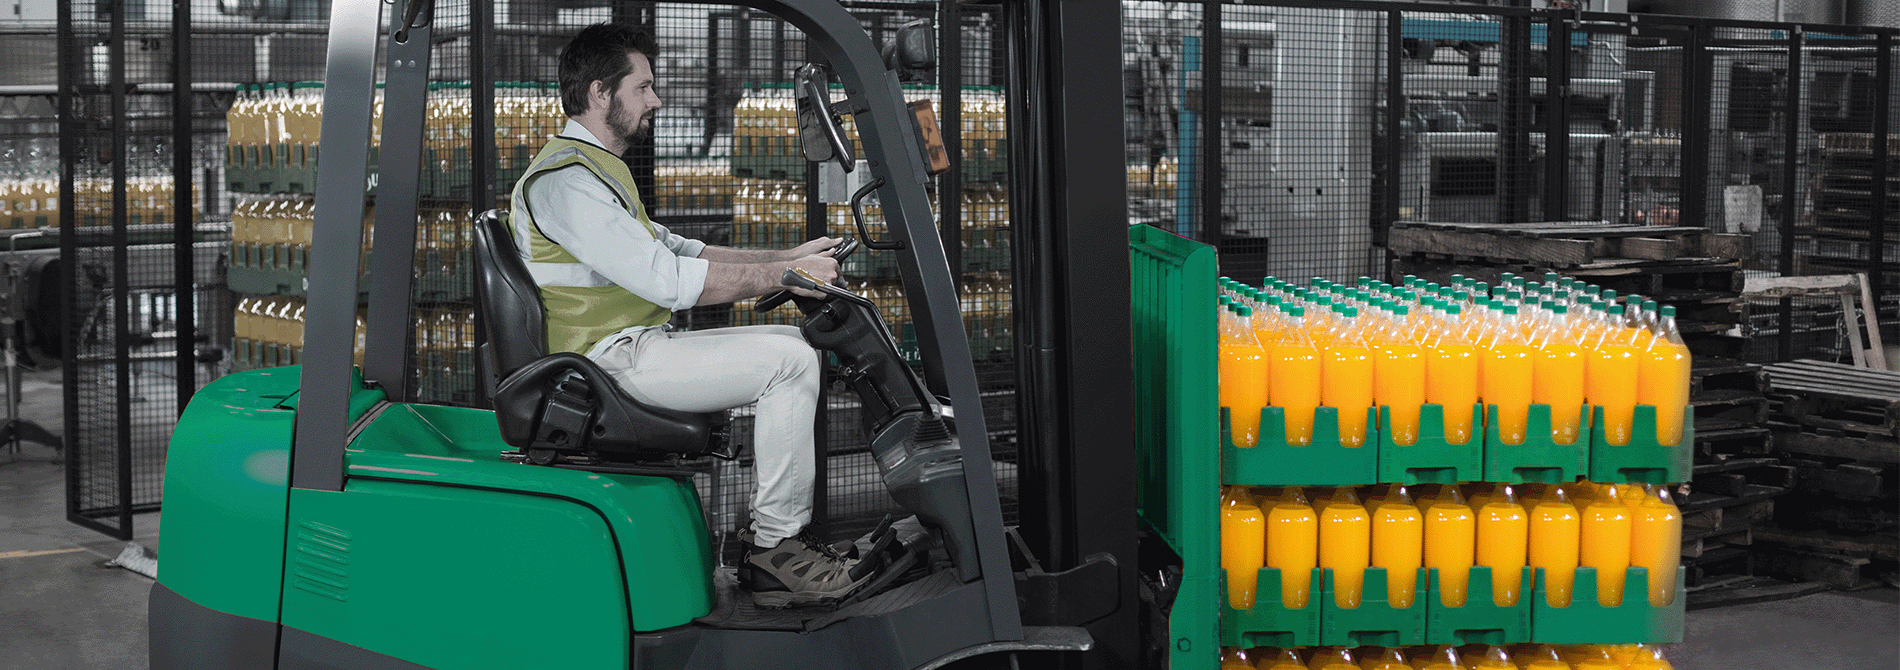 Combustion engines change to electric forklifts - Monday, 09.10.2023